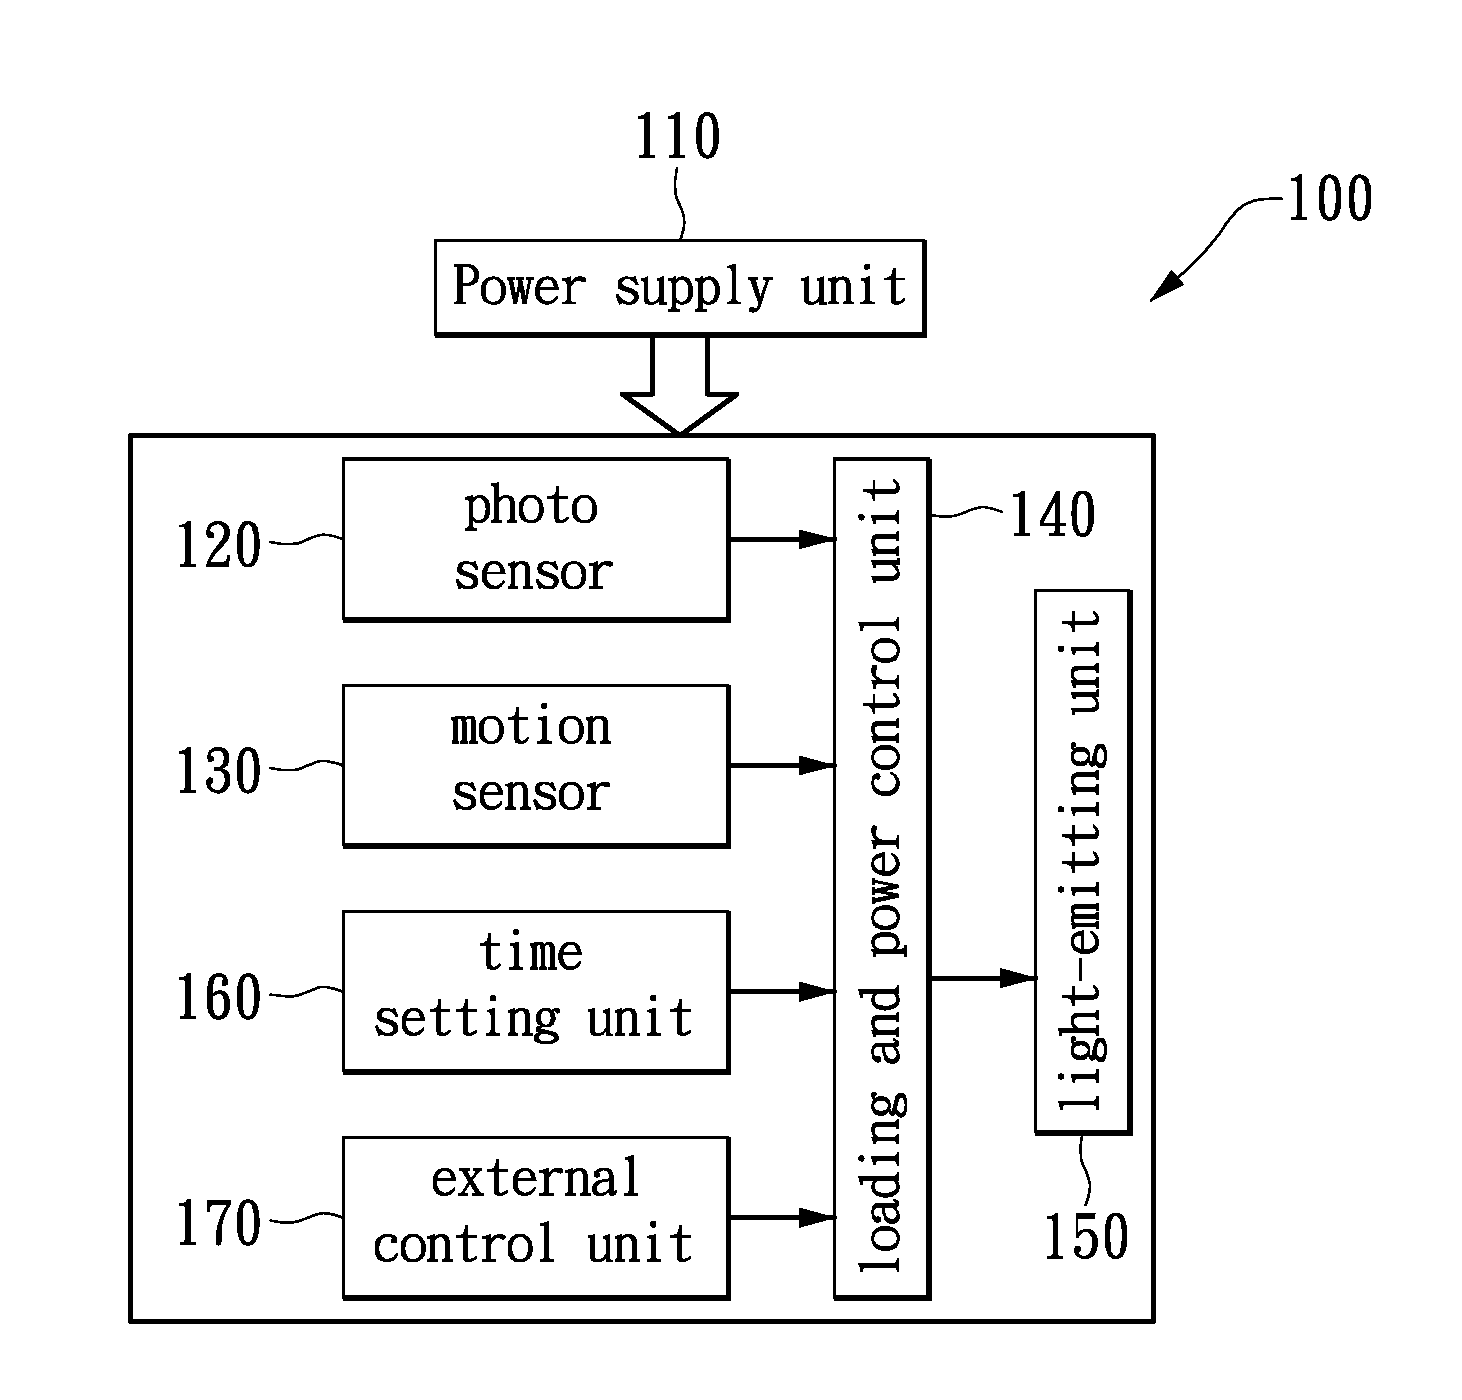 App based free setting method for setting operating parameter of security light